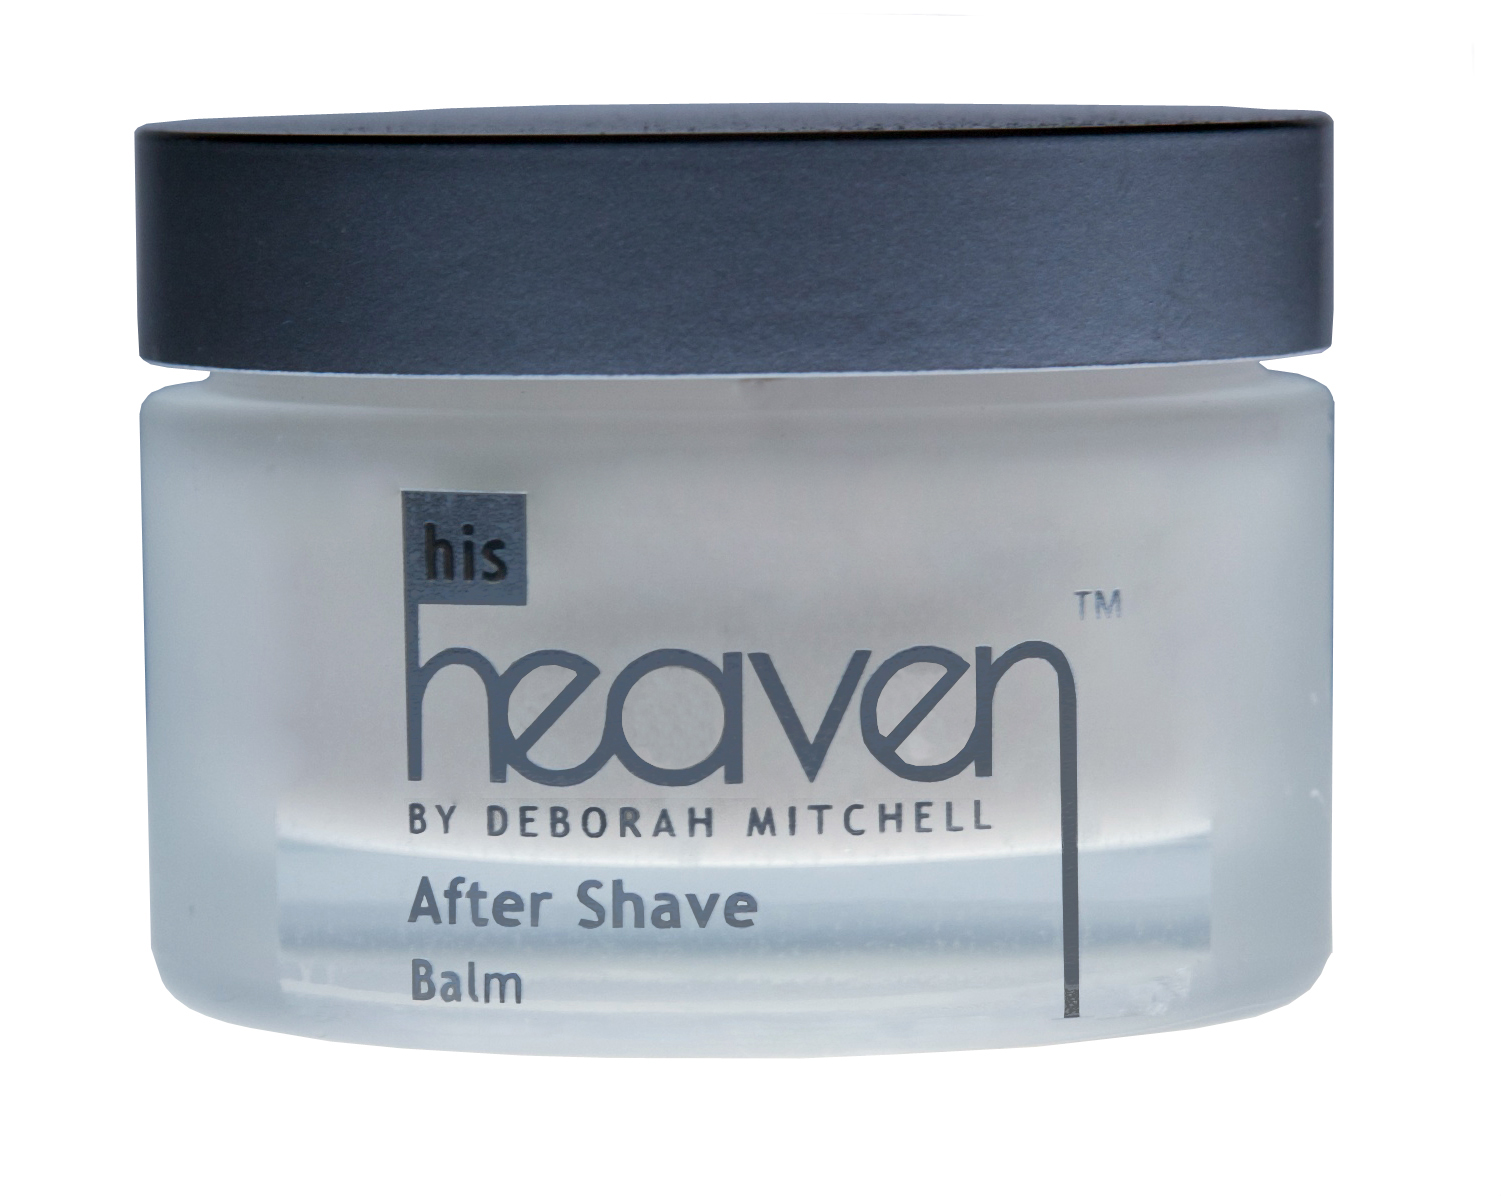 His After Shave Balm